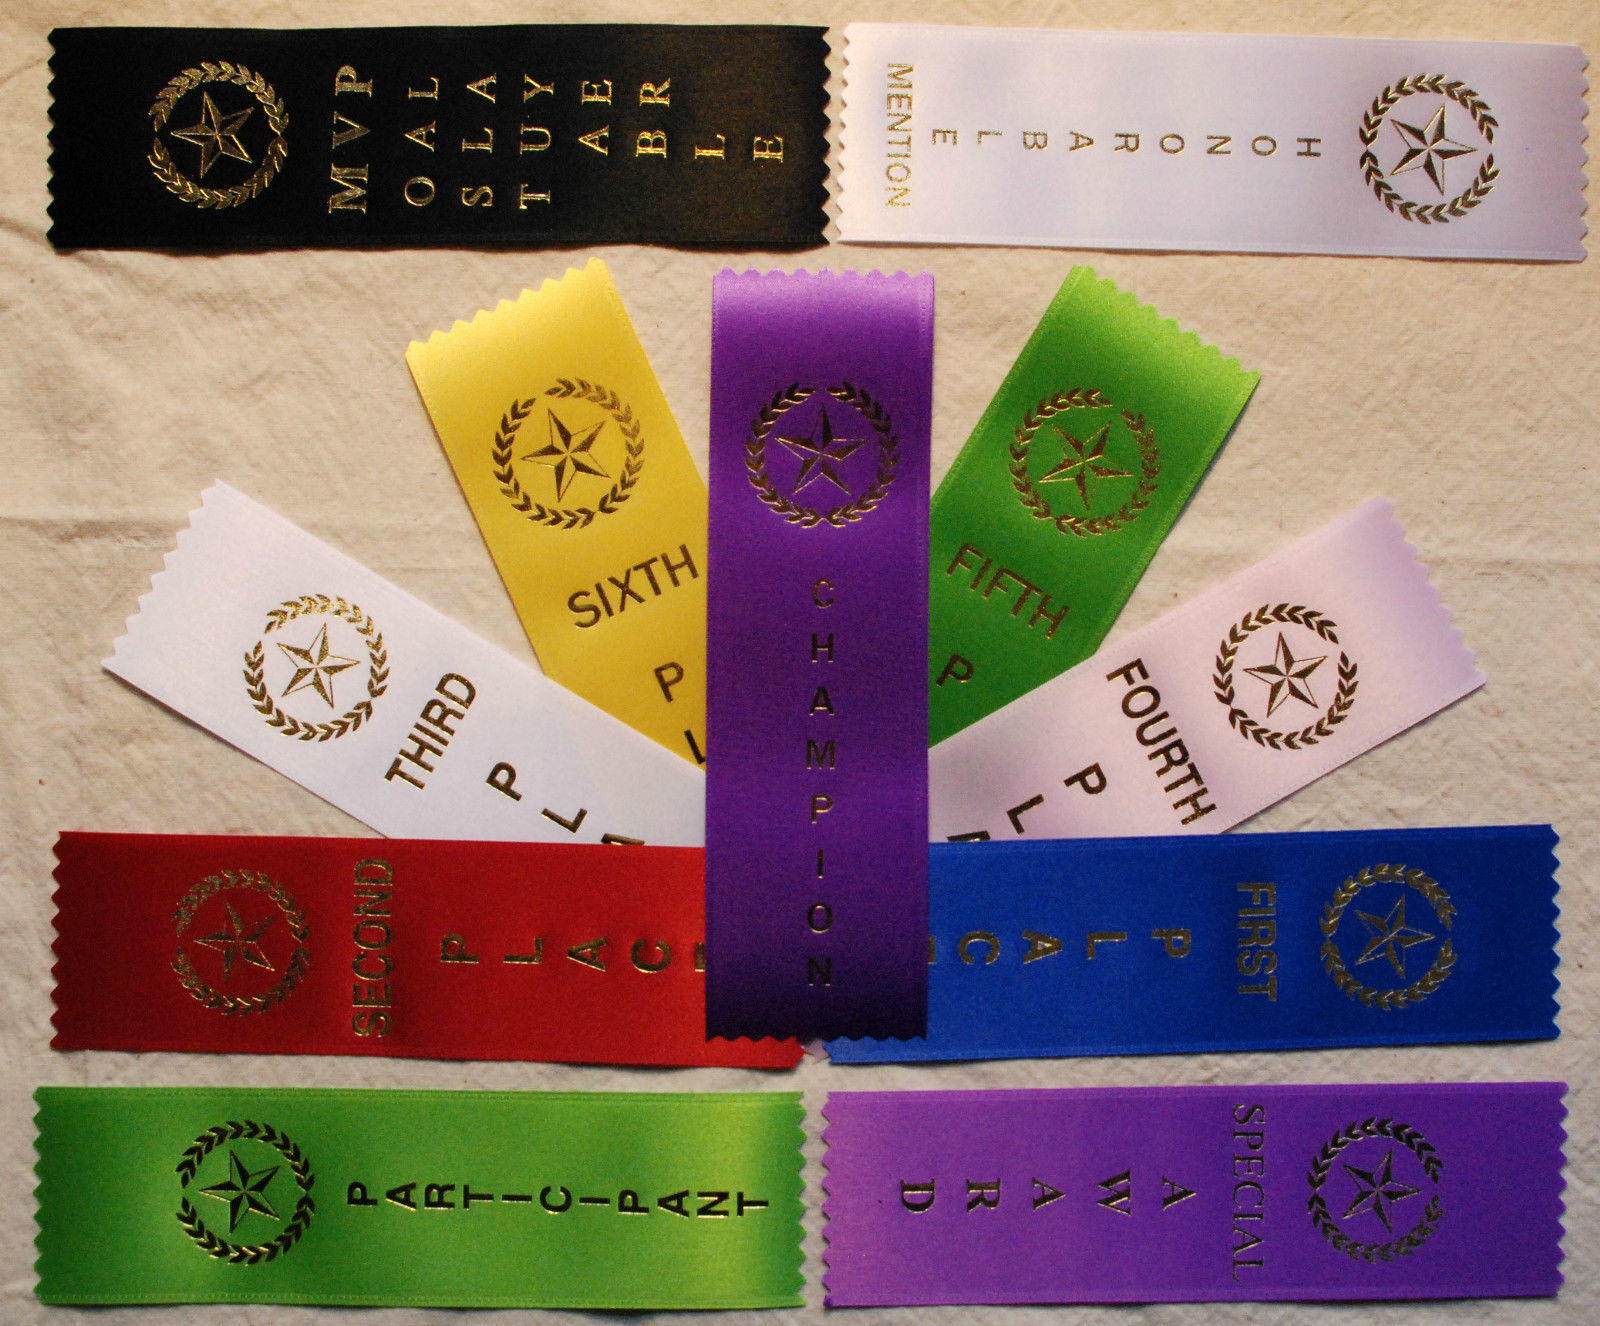 LOT OF 12 Award Place Event Prize Ribbons Your choice